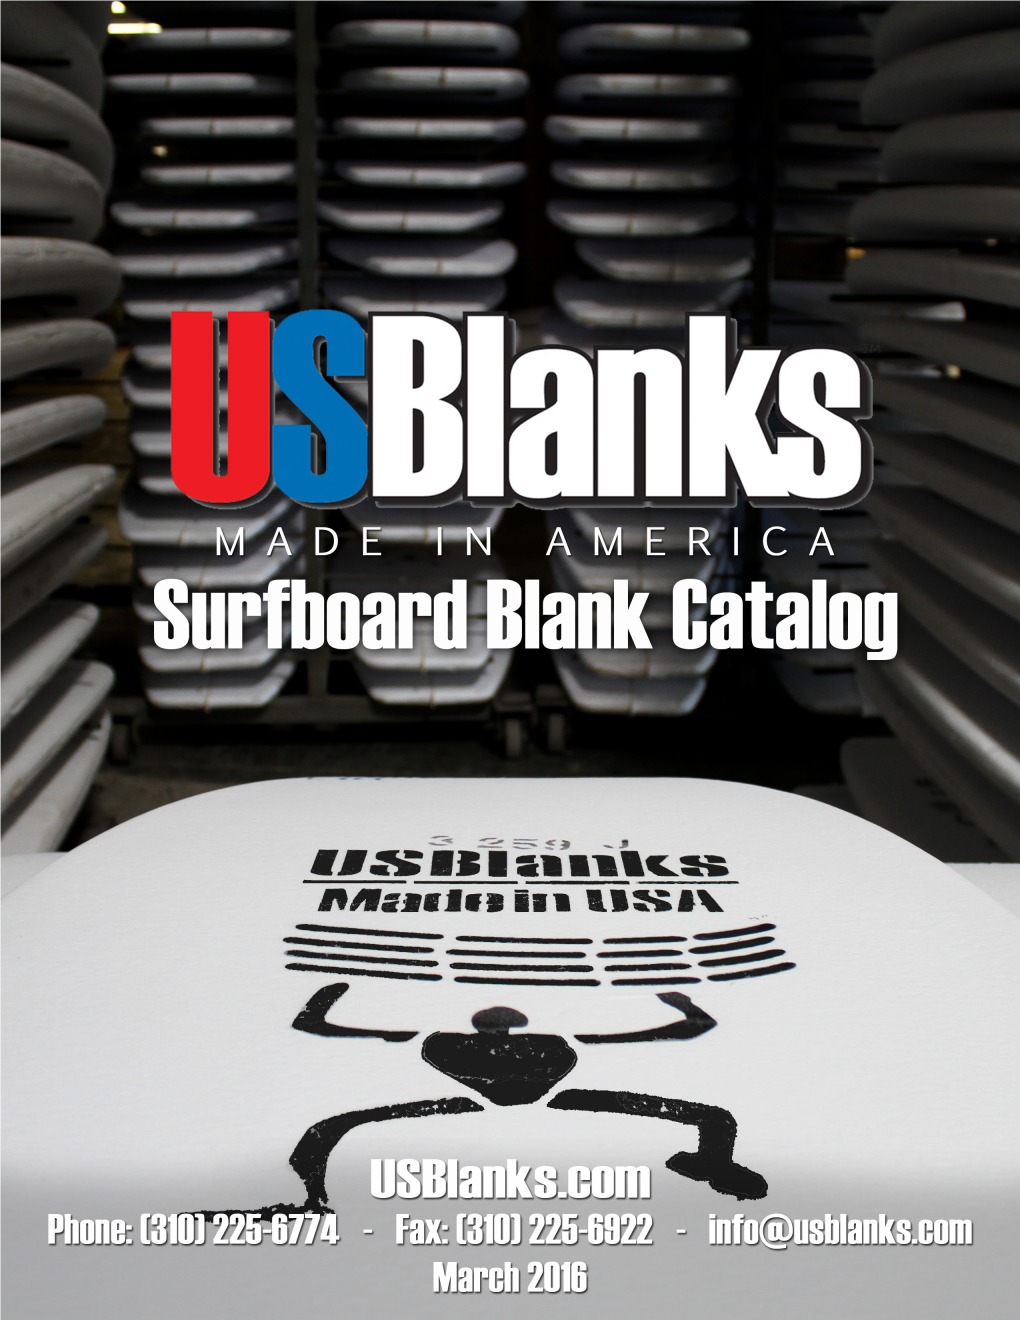 EPS BLOCK CUT BLANKS Manufactured from White Hot Surfboard Foam Billets Available in 1.5 Lb